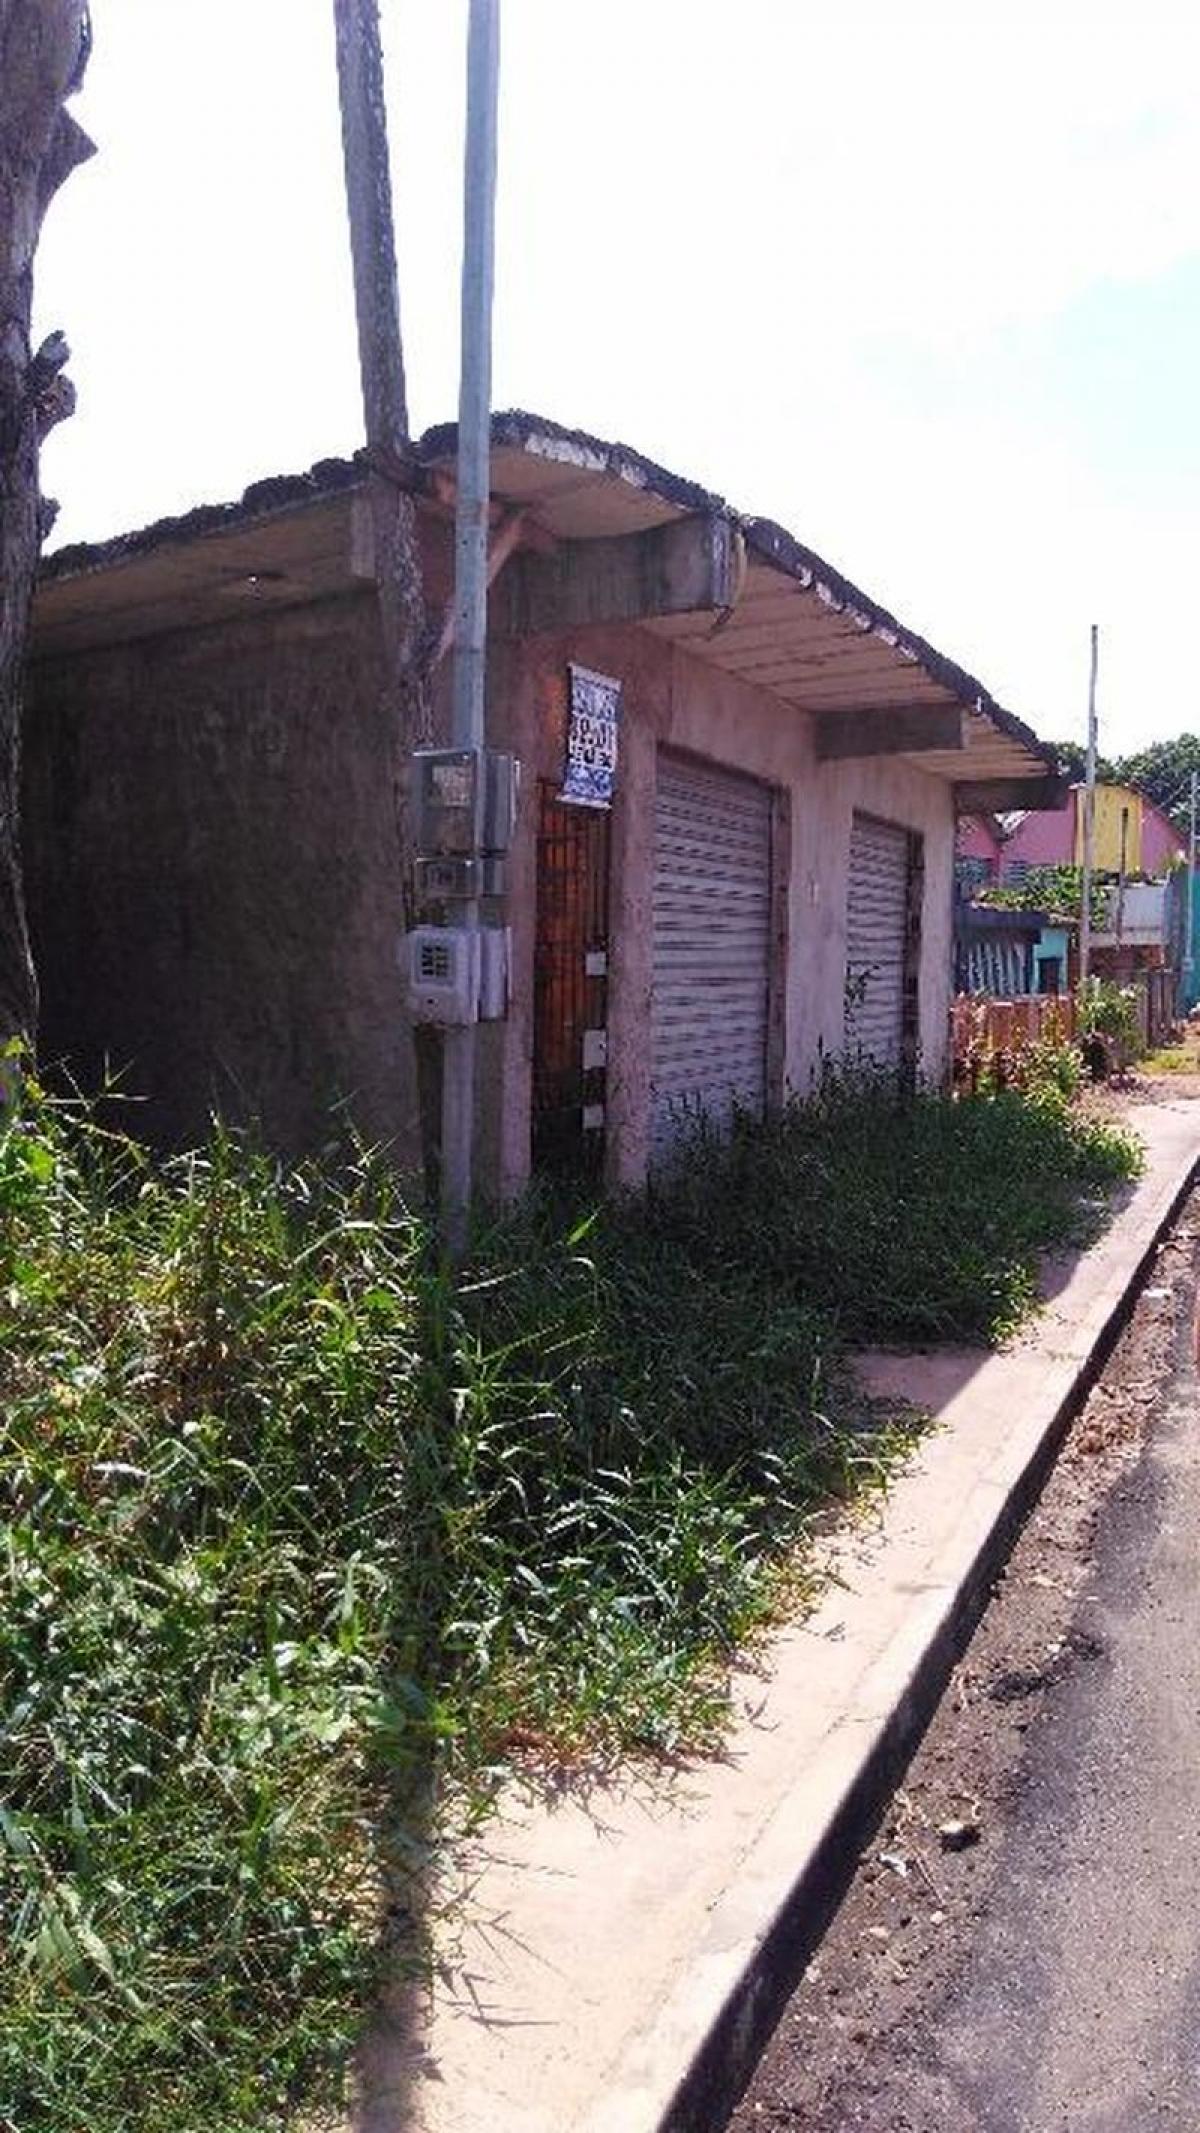 Picture of Commercial Building For Sale in Para, Para, Brazil